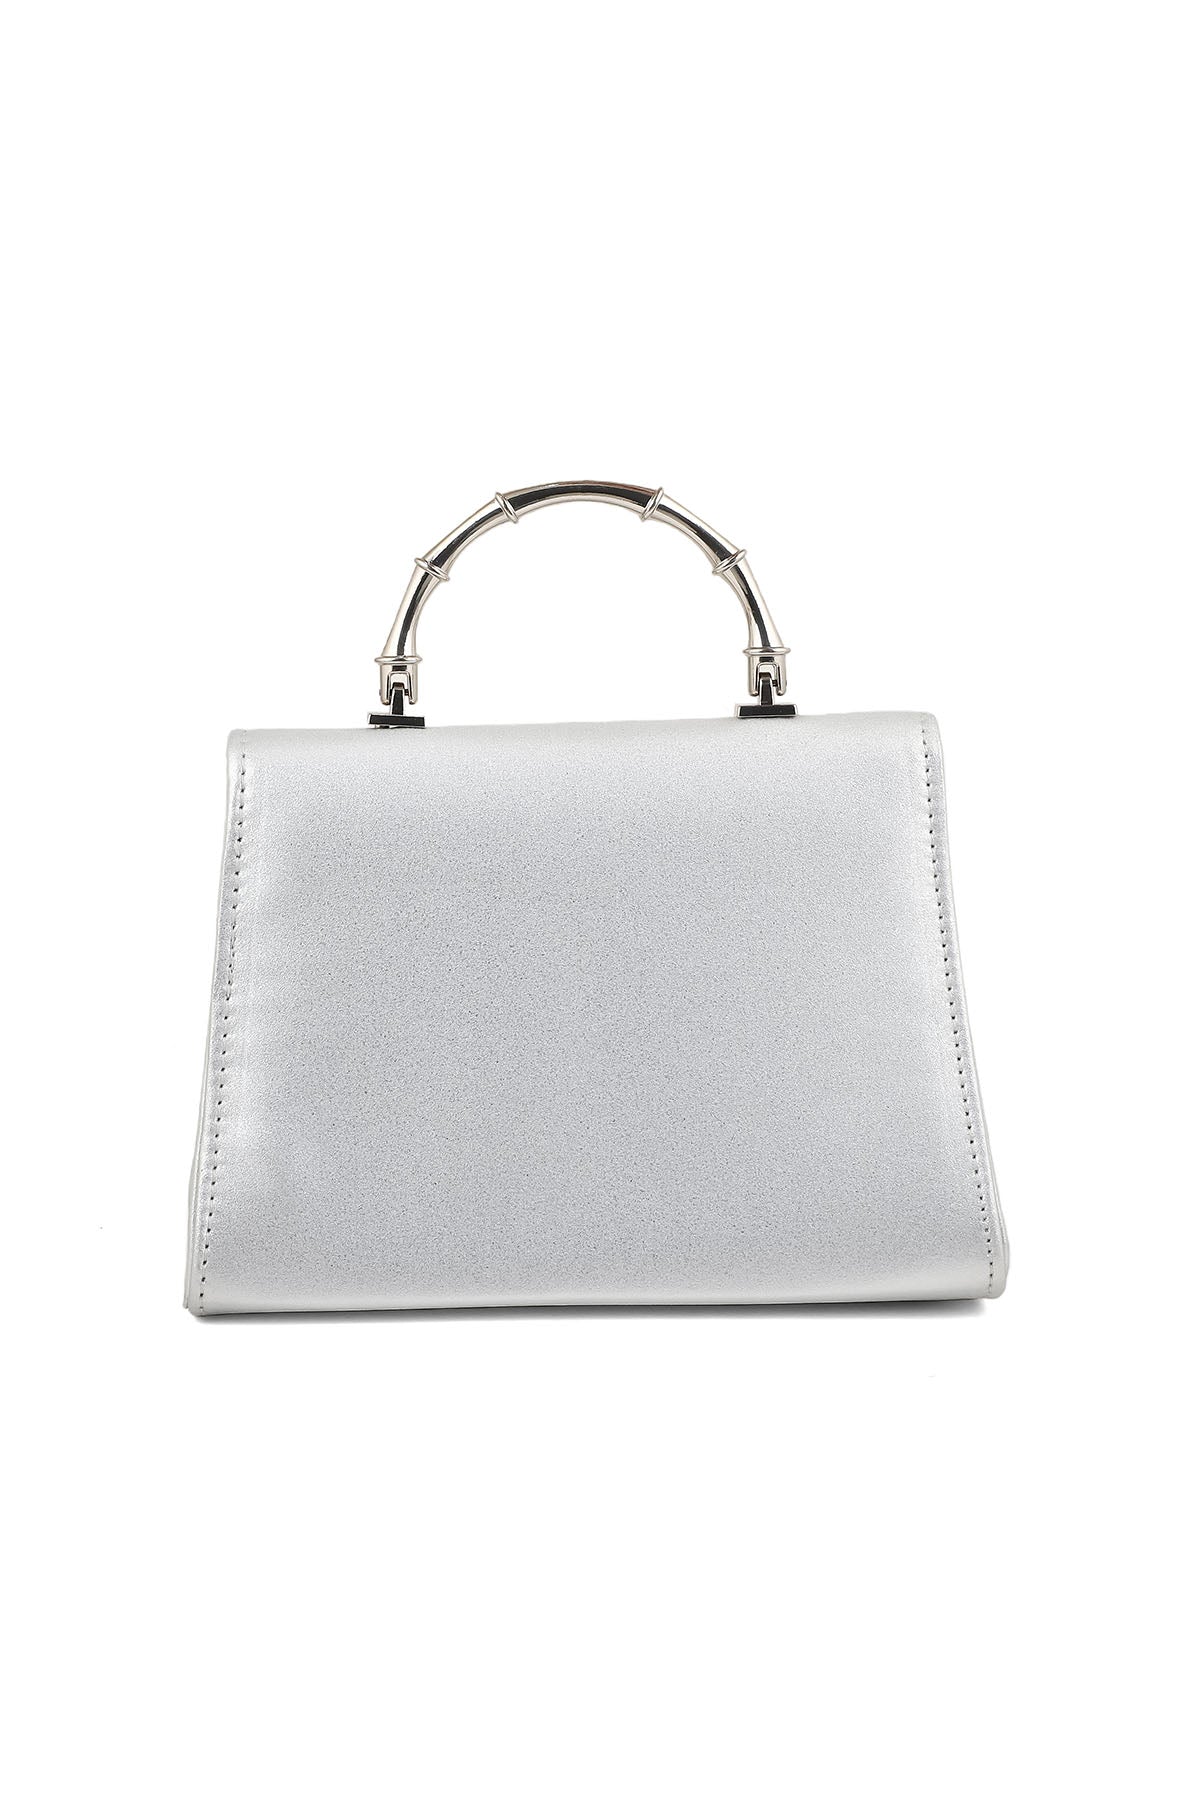 Top Handle Hand Bags B21591-Silver